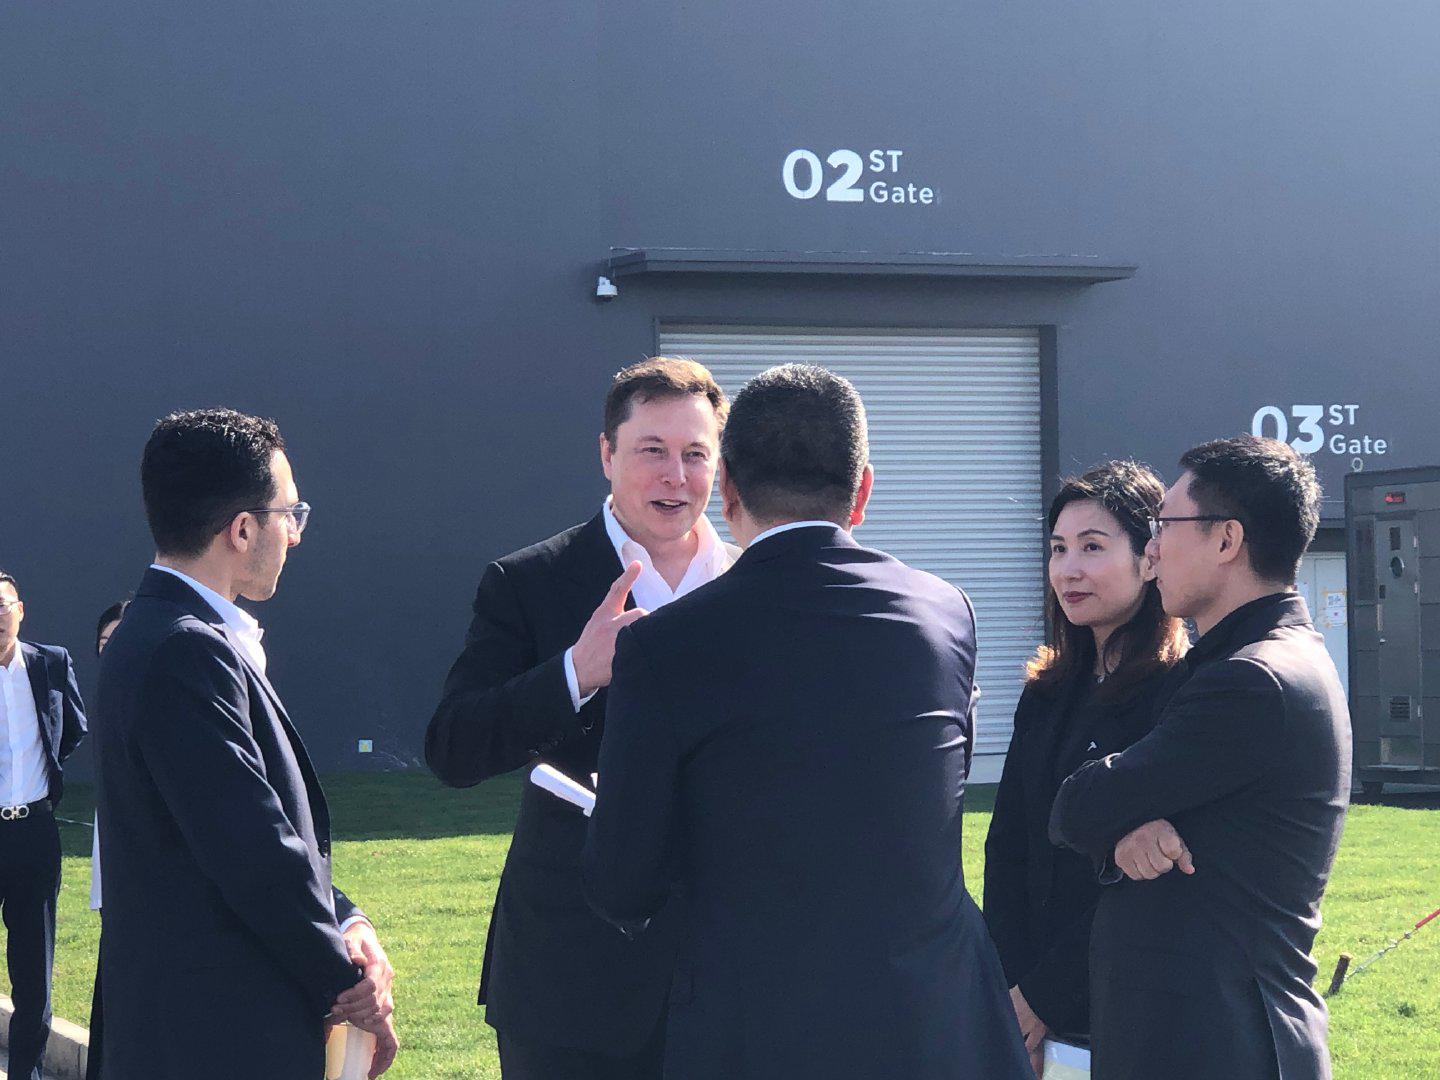 Tesla Giga 3 Shanghai New Jobs Opening Hints Solar and Energy Storage Business Expansion To China